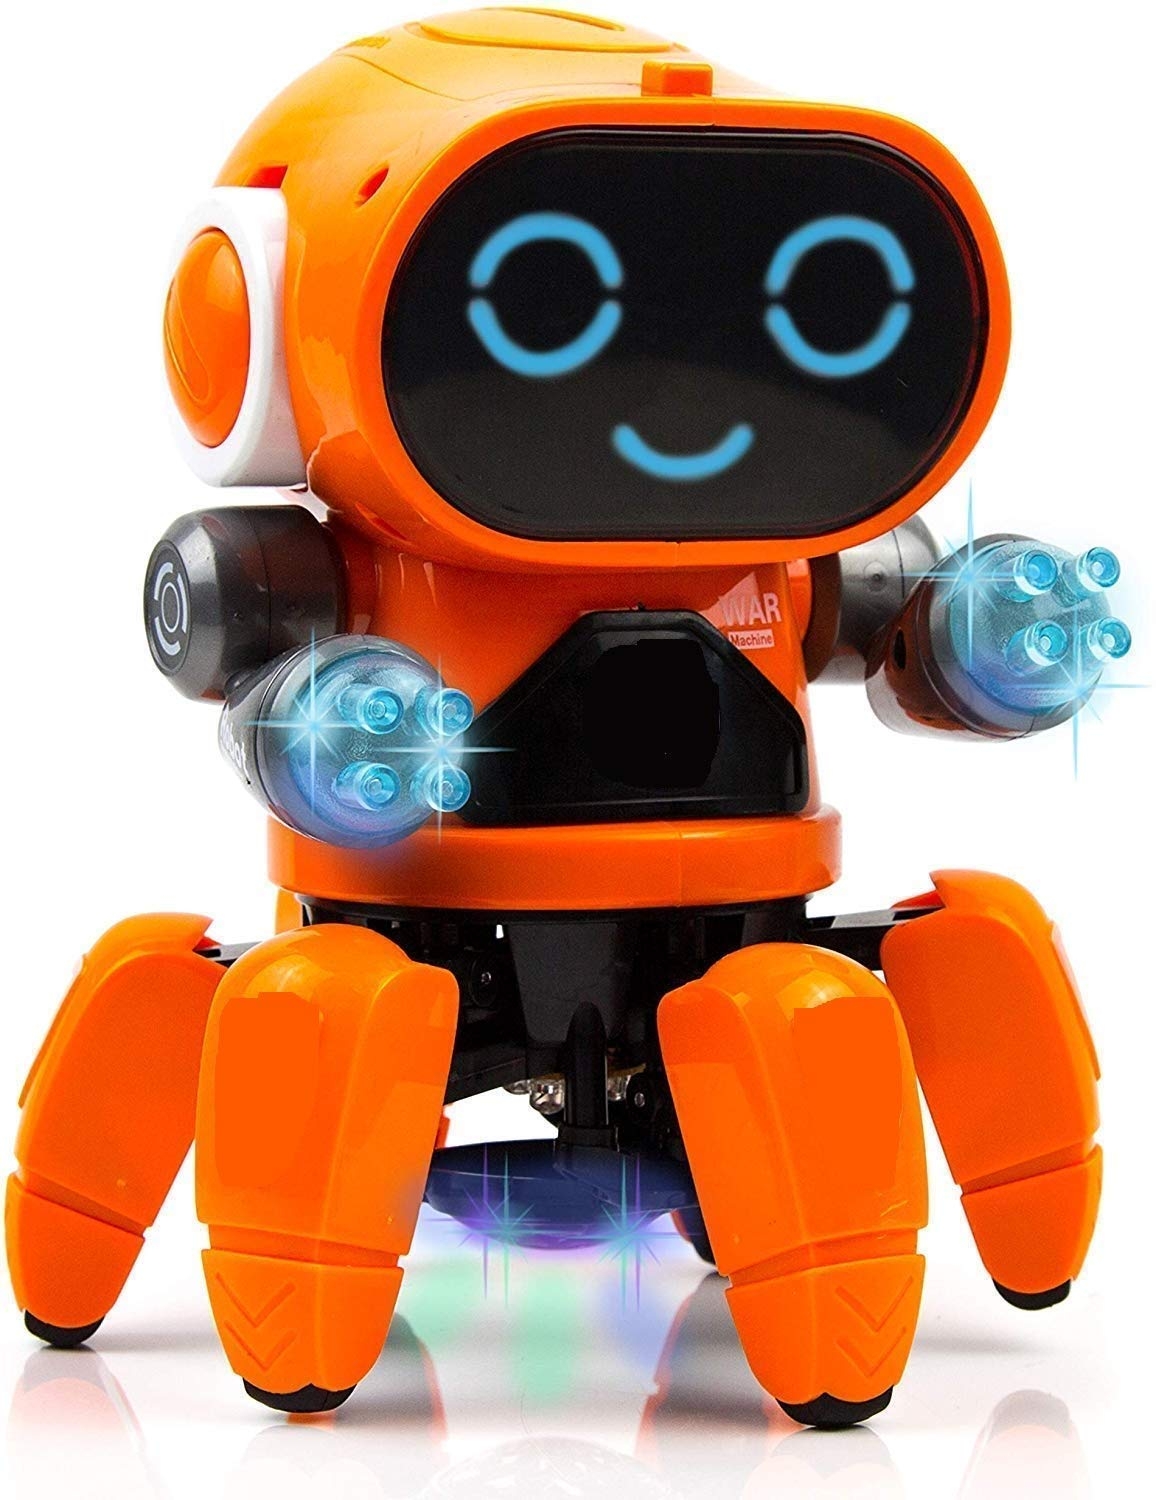 Galaxy Hi-Tech Pioneer Bot Robot Colorful Lights & Music | All Direction Movement Dancing Robot Toys for Boys & Girls